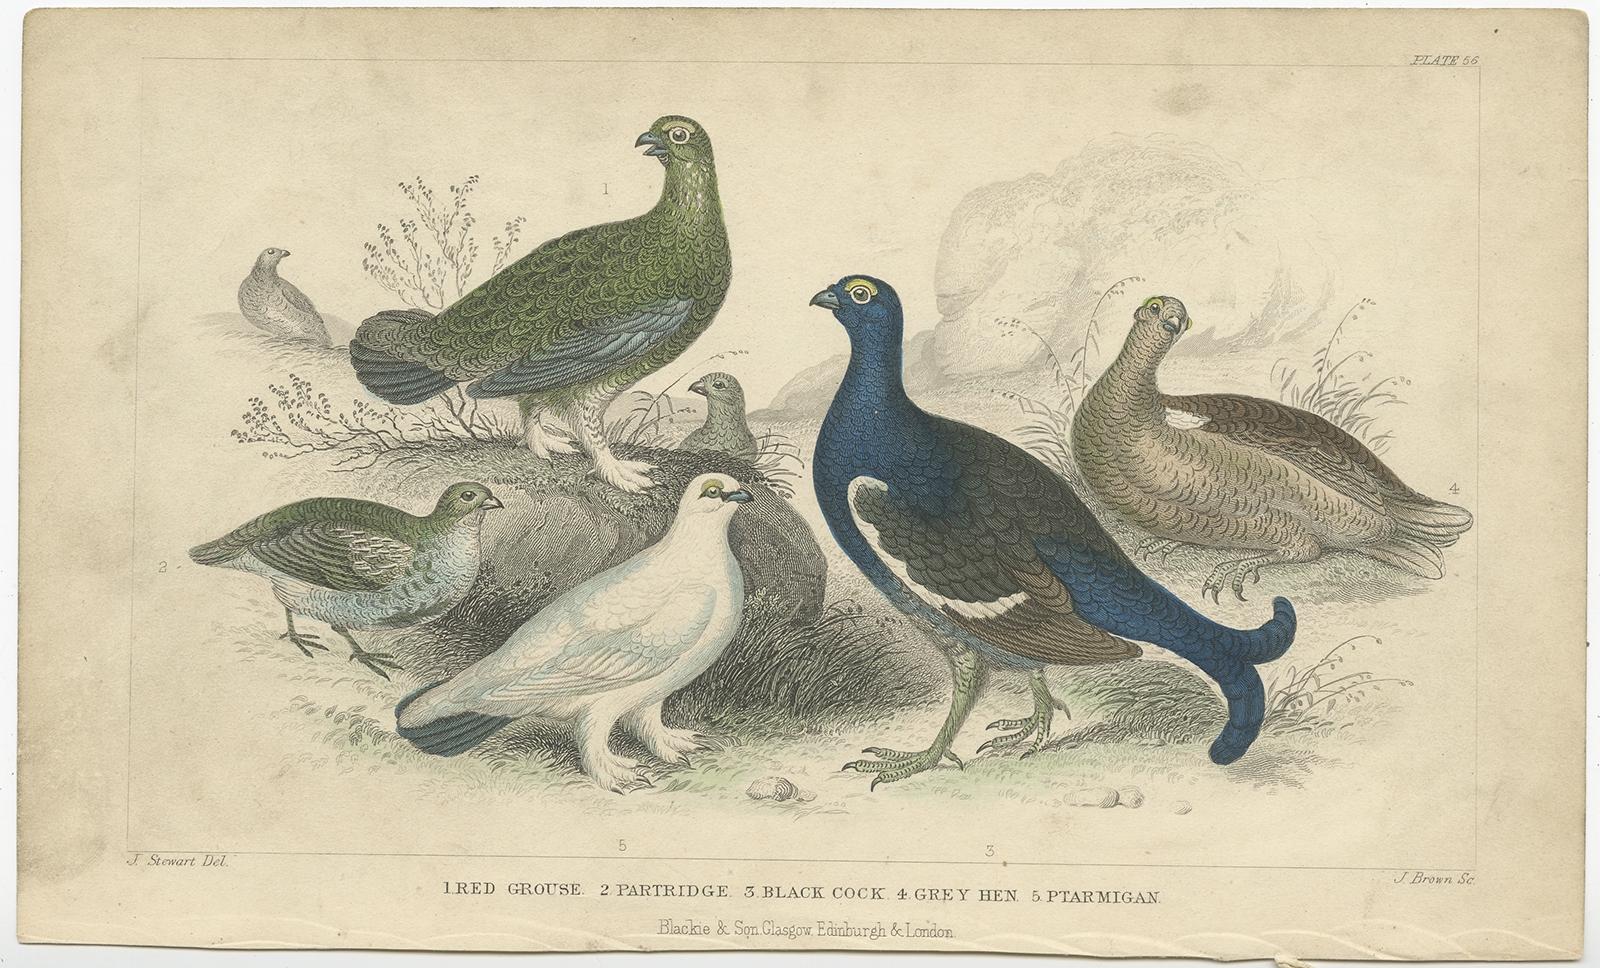 Antique bird print titled '1. Red Grouse 2. Partridge 3. Black Cock 4. Grey Hen 5. Ptarmigan'. Several types of game bird; from left to right, a partridge, red grouse, ptarmigan, black cock and grey hen. This print originates from 'A History of the